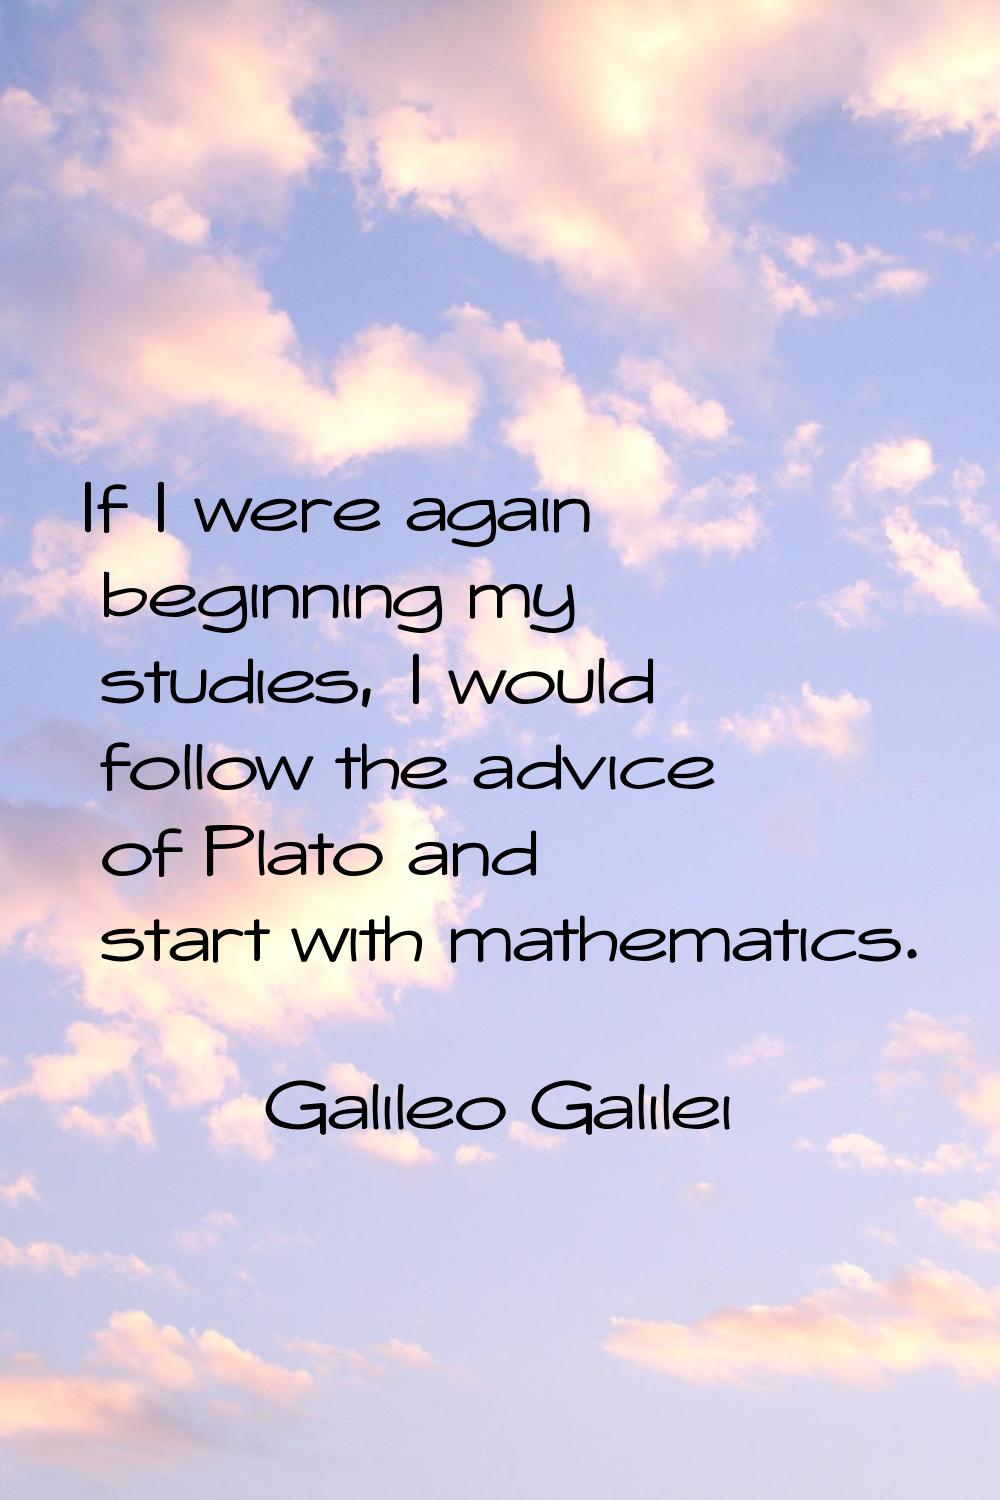 If I were again beginning my studies, I would follow the advice of Plato and start with mathematics